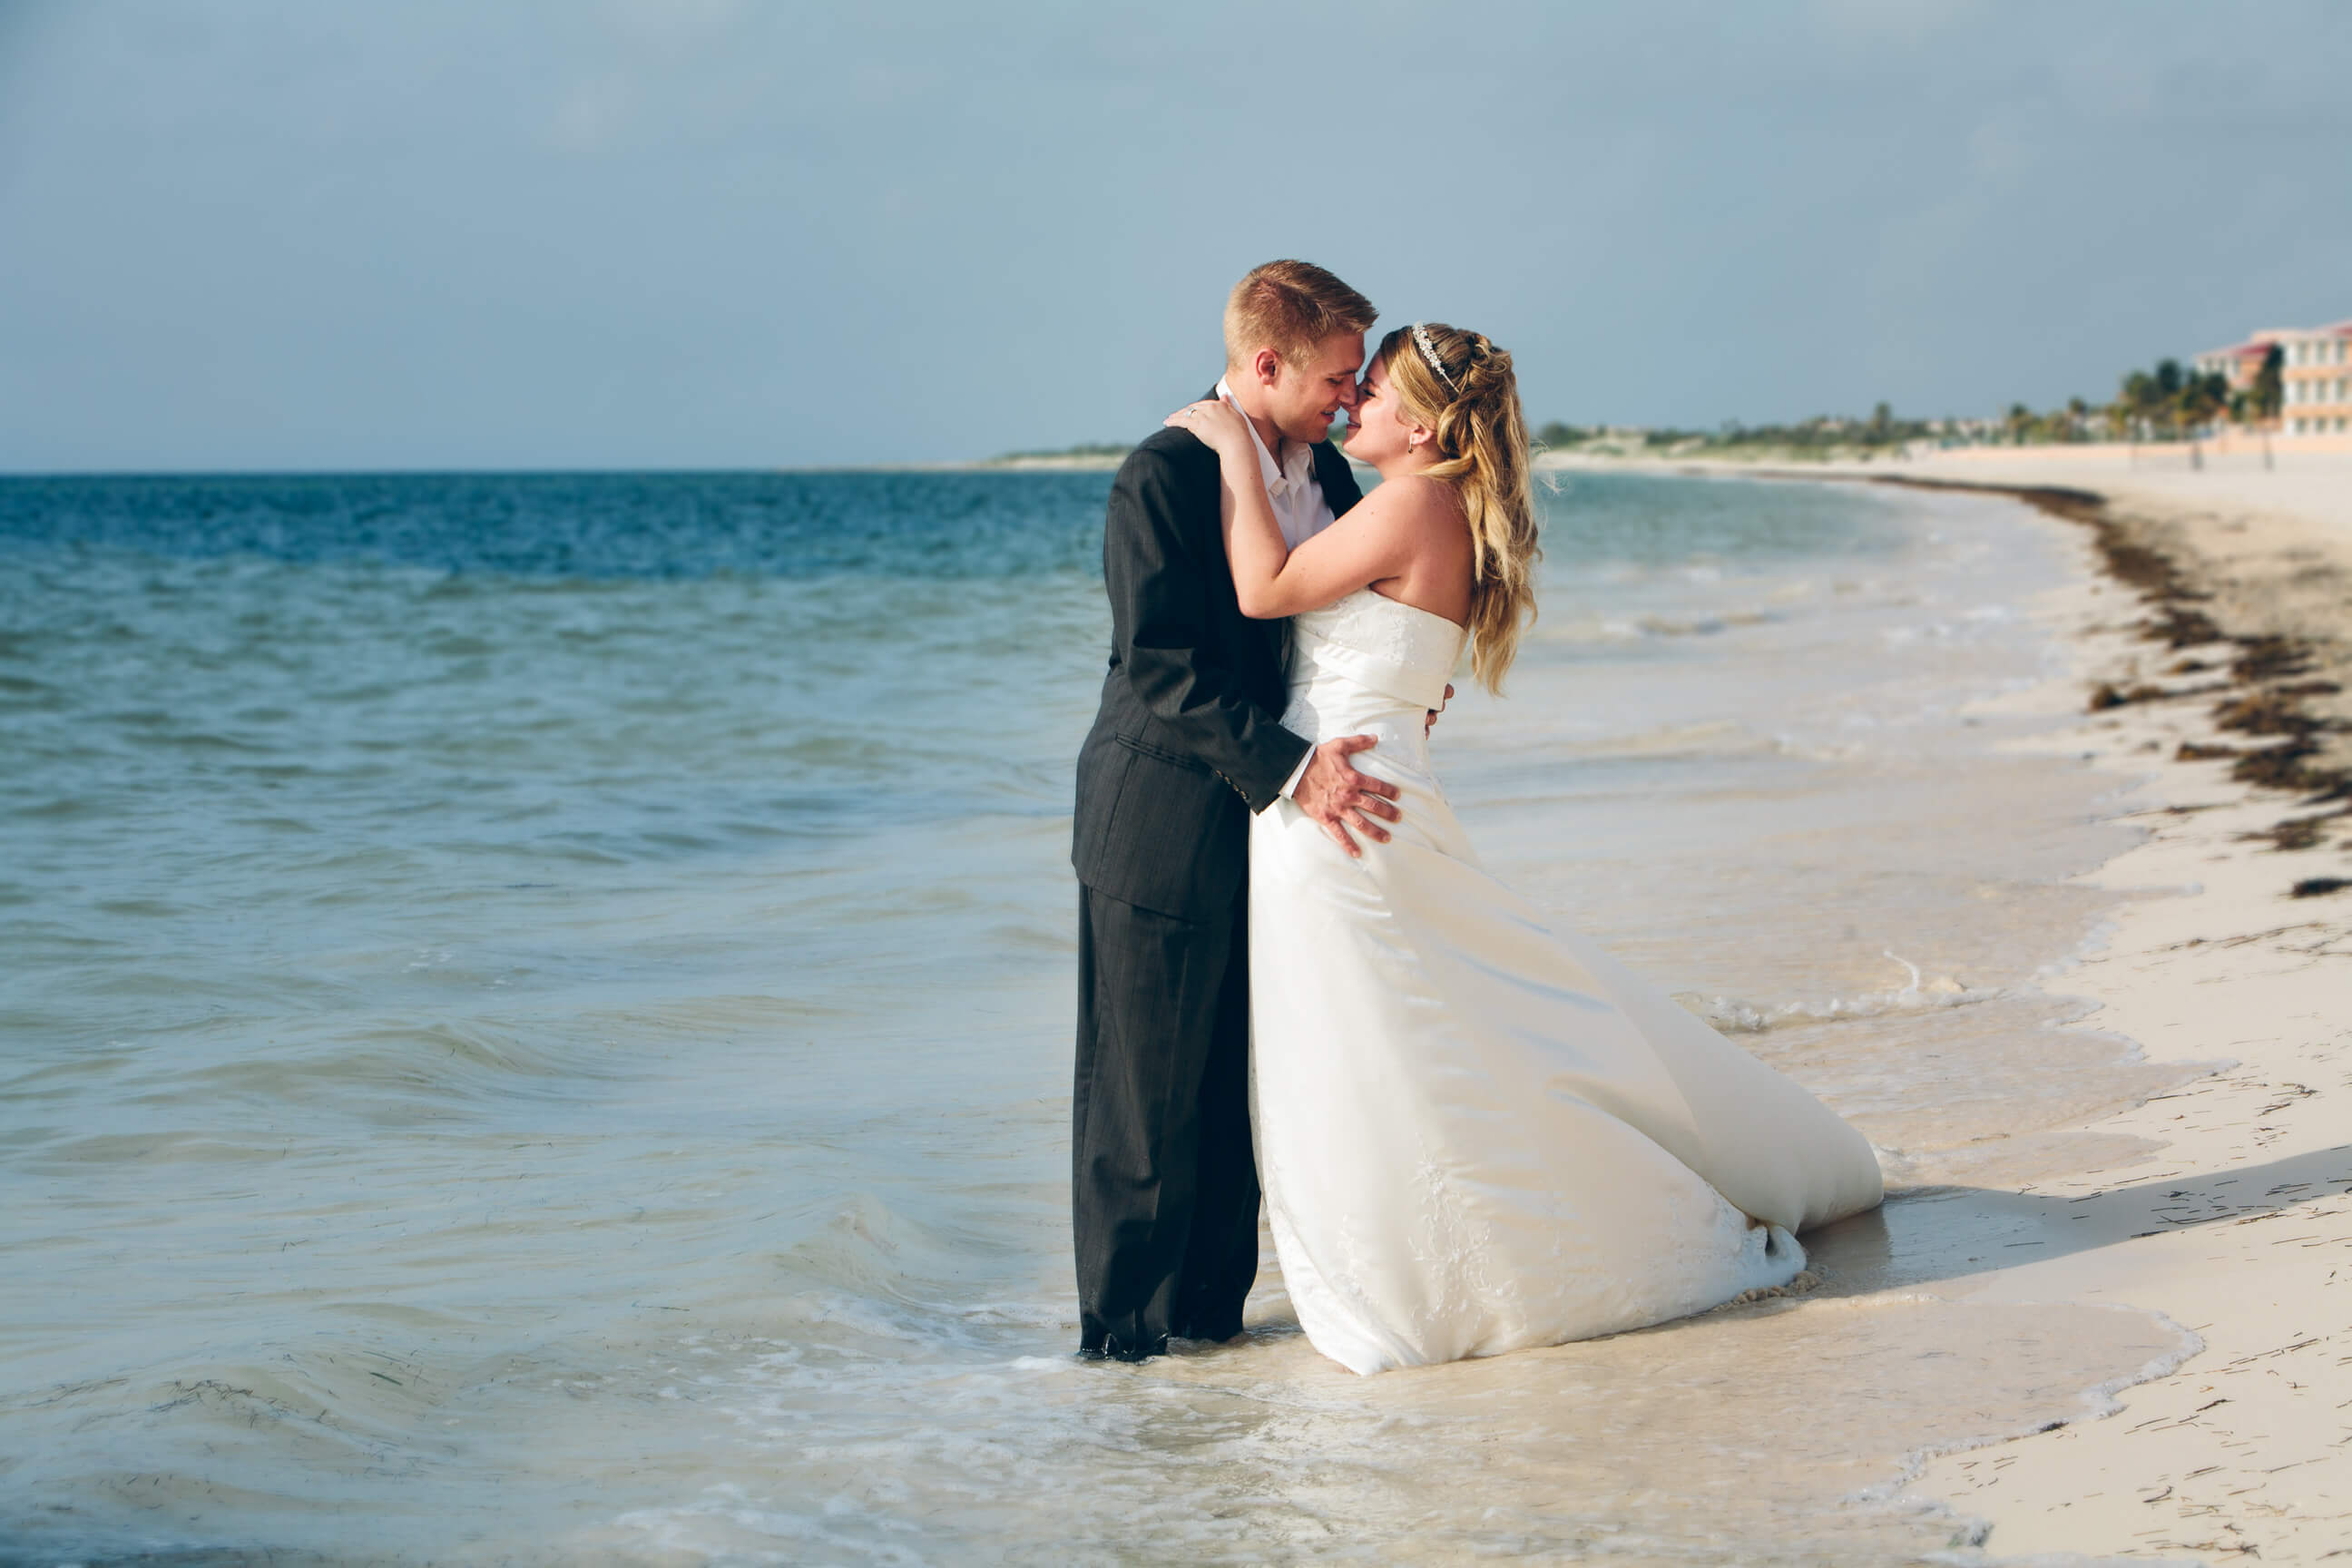 A bride and groom kiss on the beach during their rock the dress photos in Cancún Mexico.